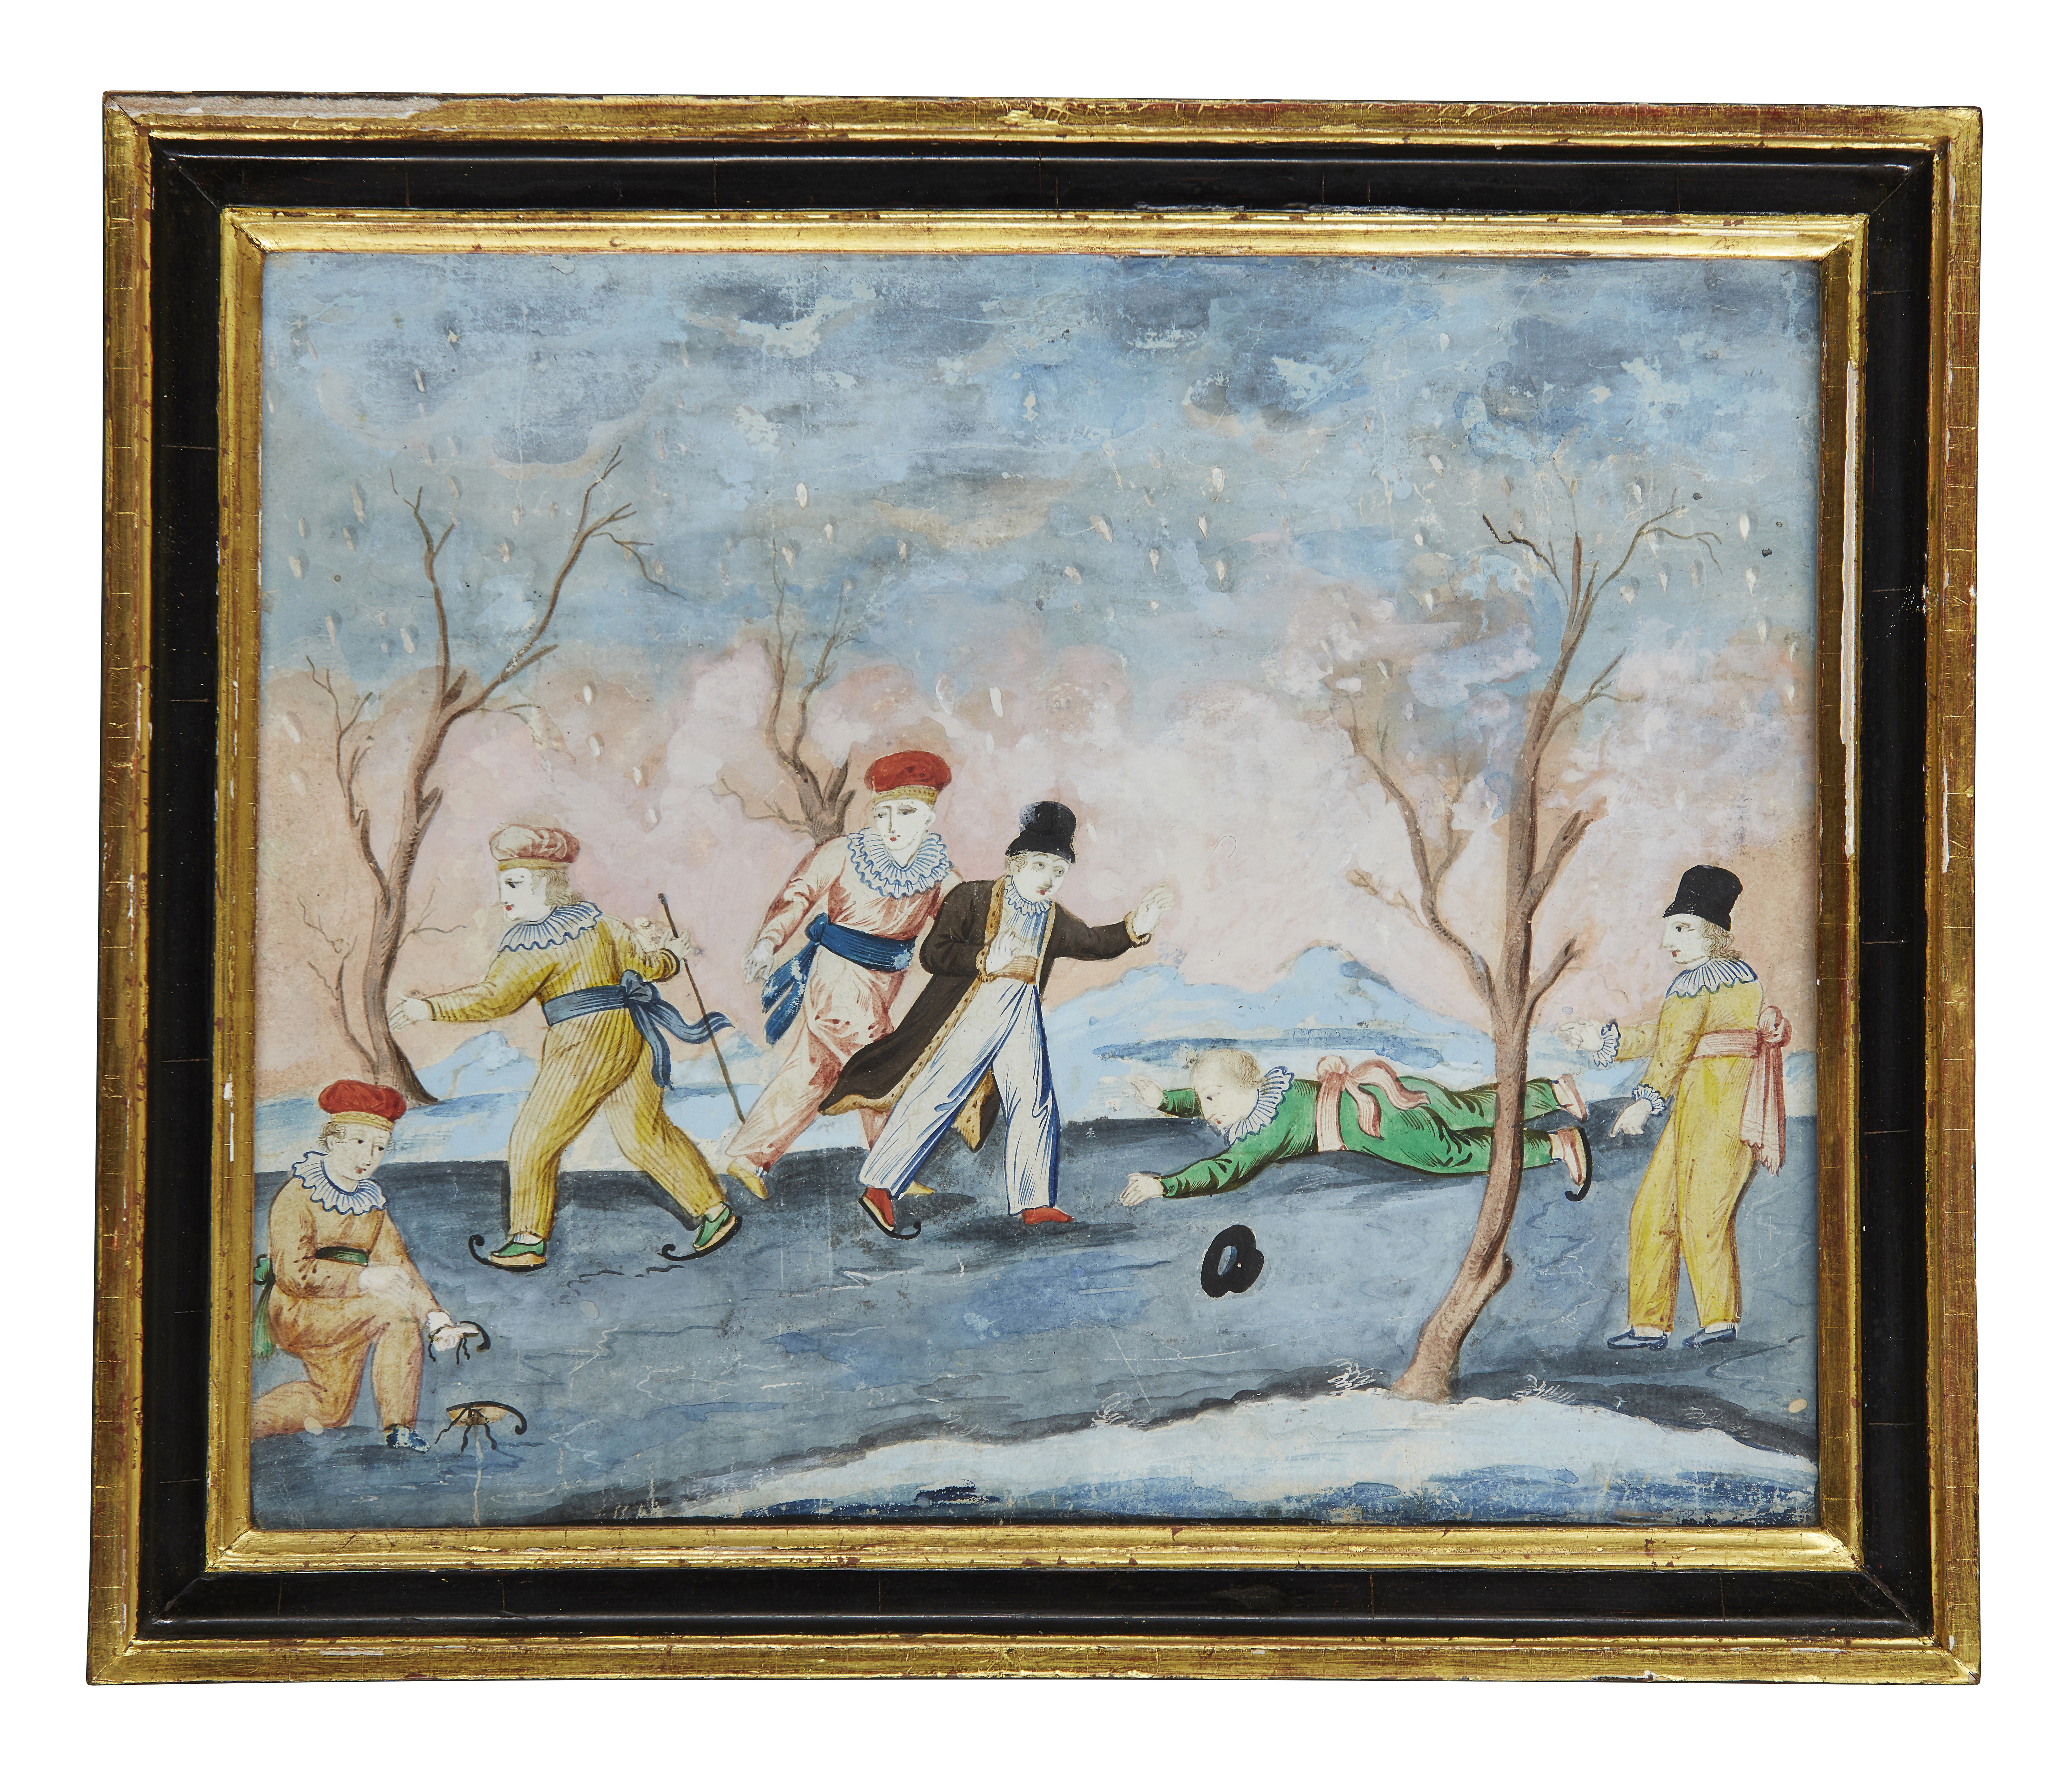 A set of four Italian paintings representing the Four Seasons